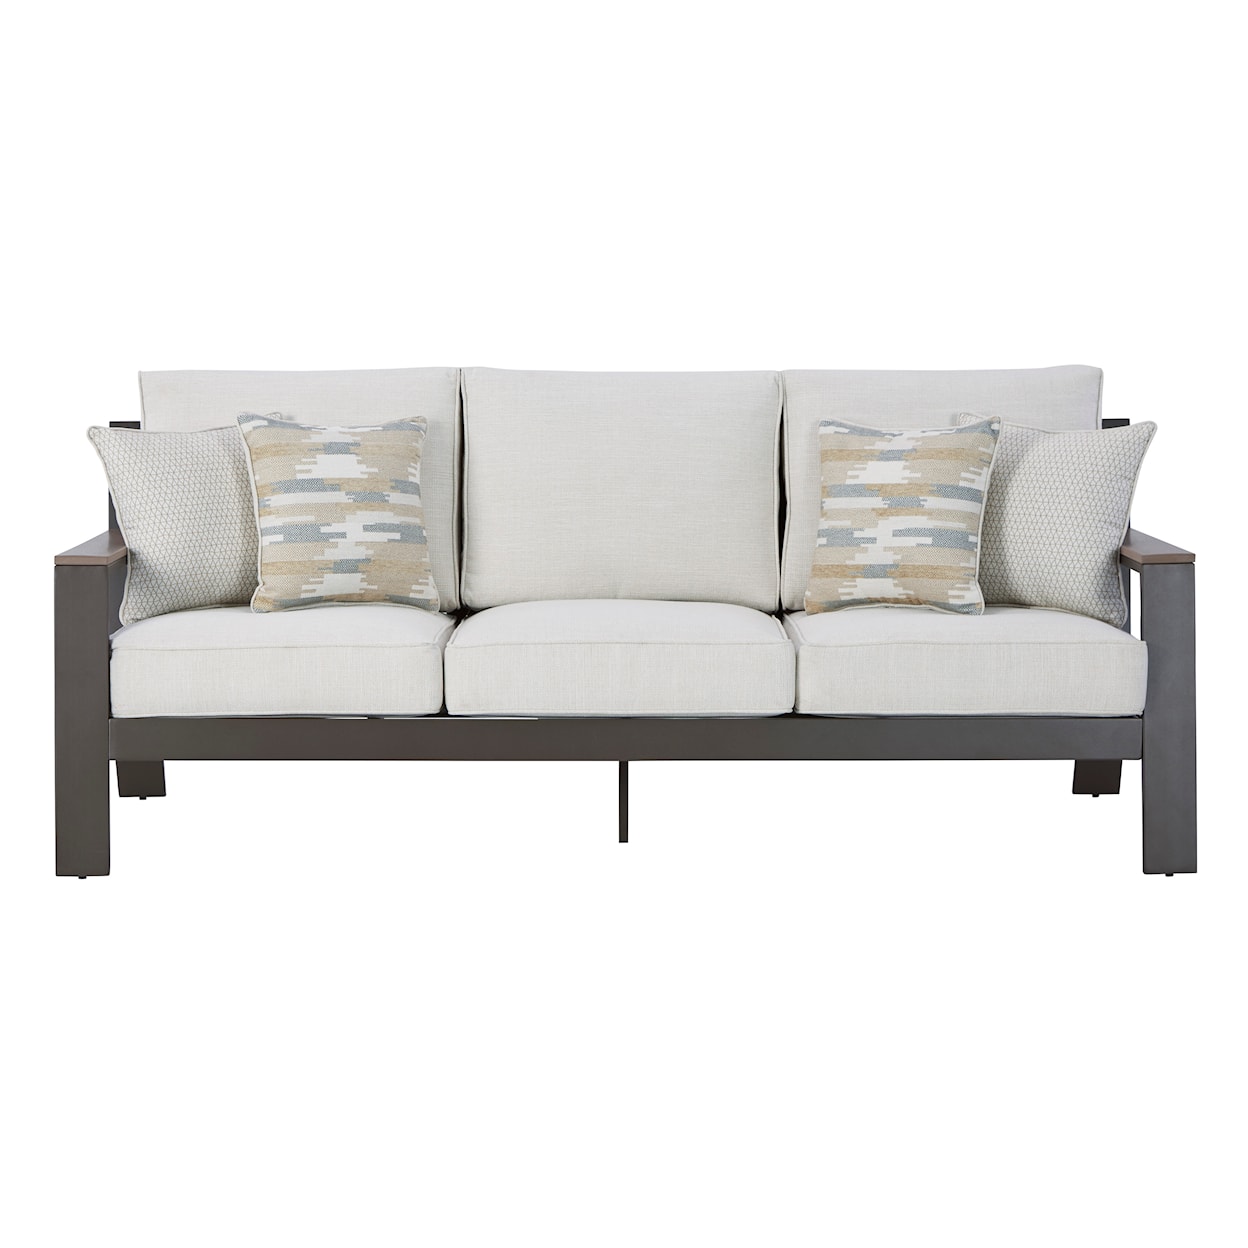 Signature Design by Ashley Tropicava Outdoor Sofa with Cushion